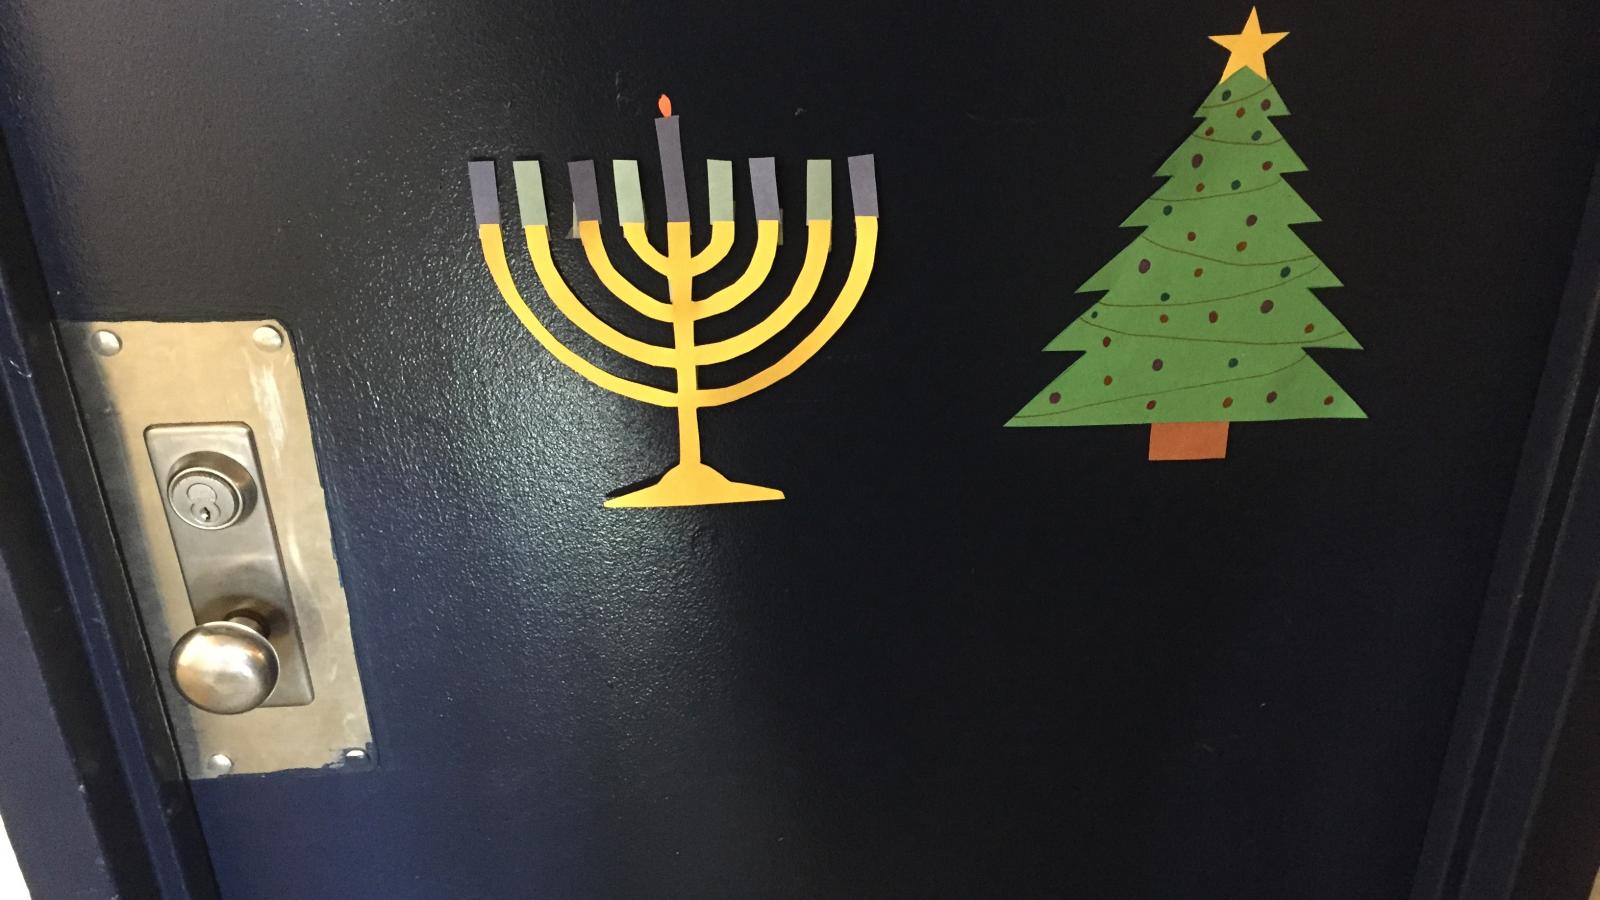 Ohio State University Campus Religion: Menorah and Christmas Tree in Taylor Tower